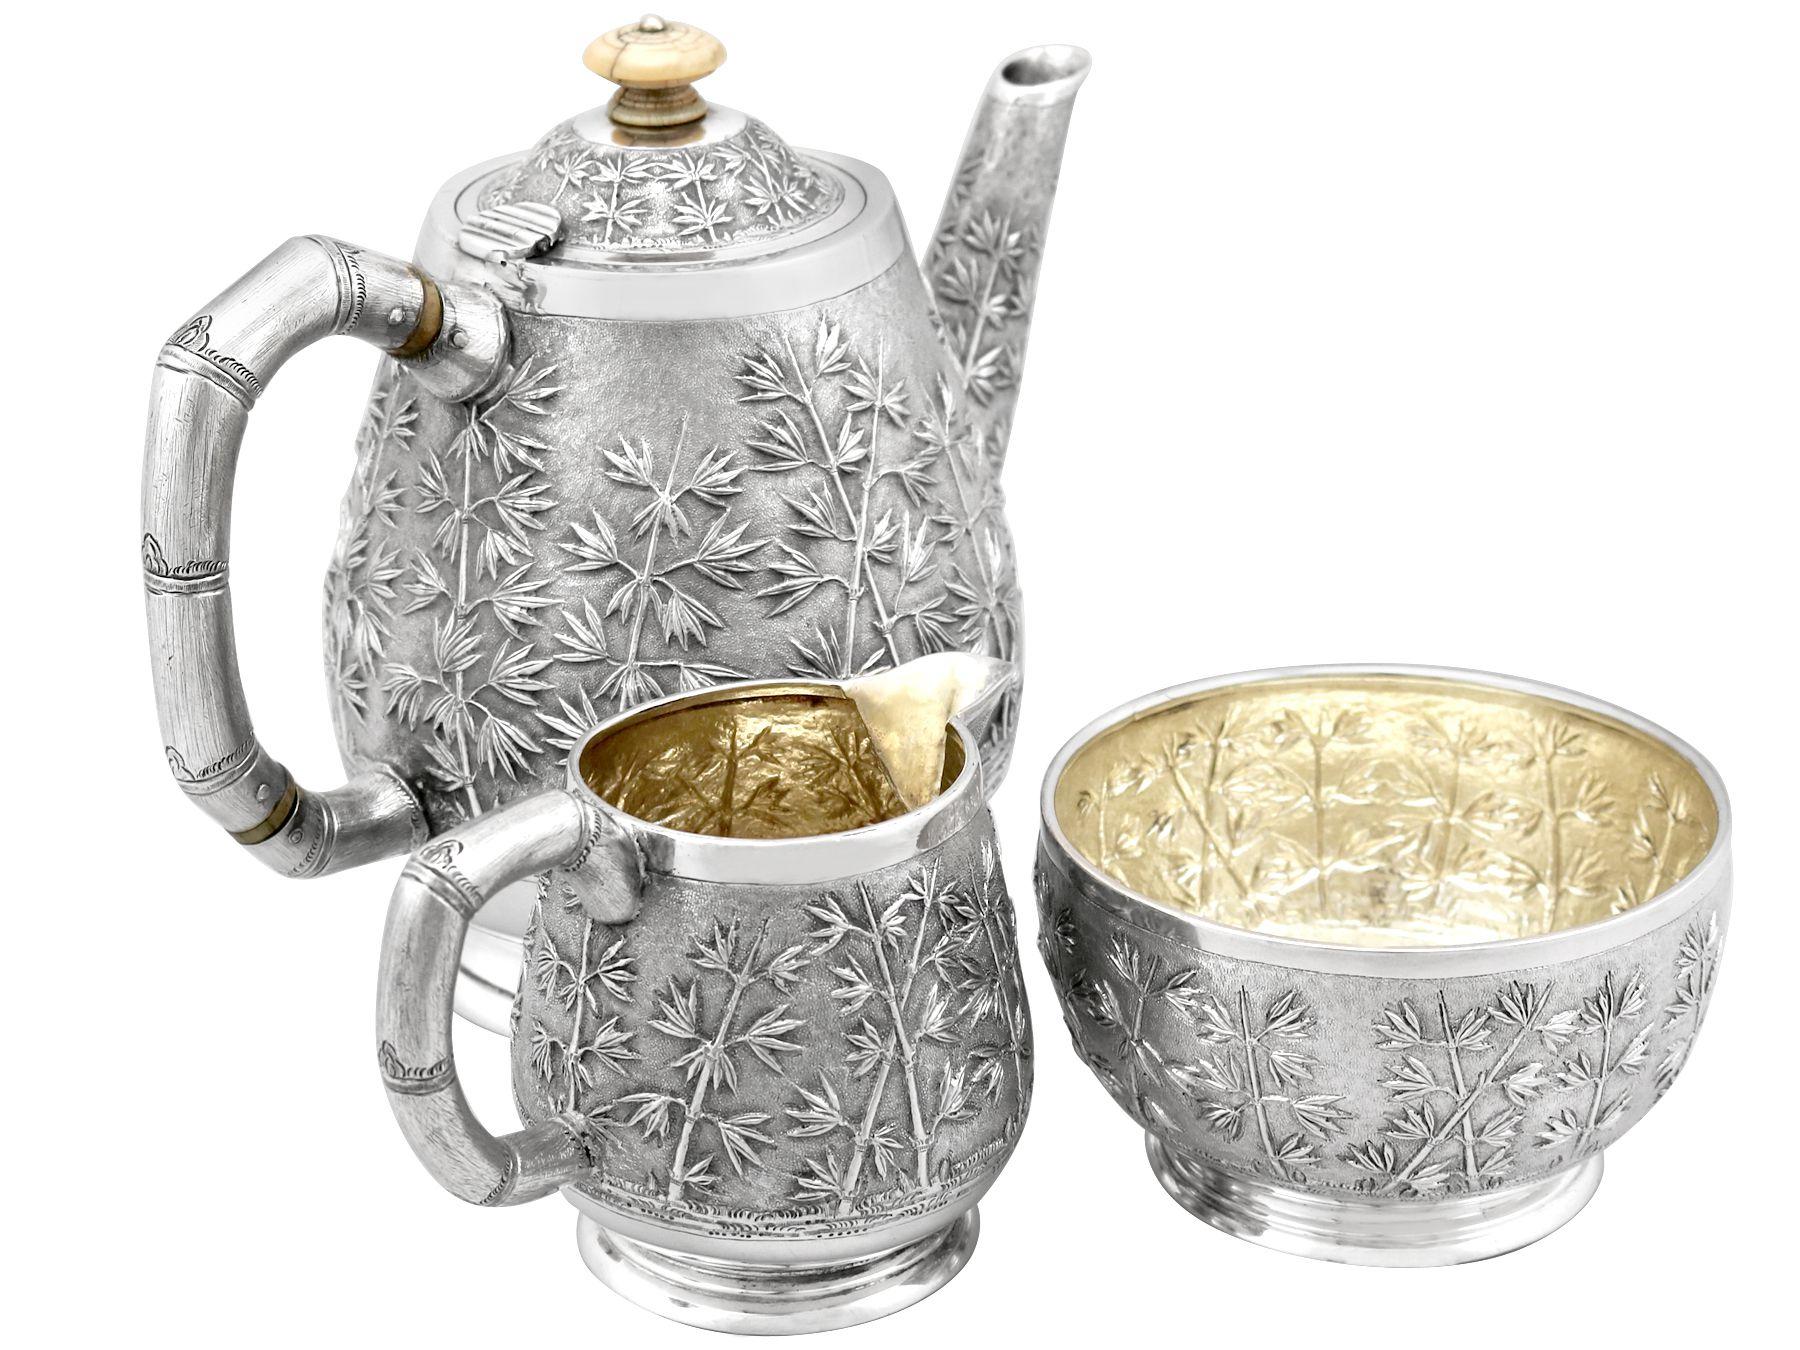 A exceptional, fine and impressive antique Indian silver three piece tea service; an addition to our diverse silver teaware collection.

This exceptional antique Indian silver tea set/set consists of a teapot, cream jug and sugar bowl.

Each